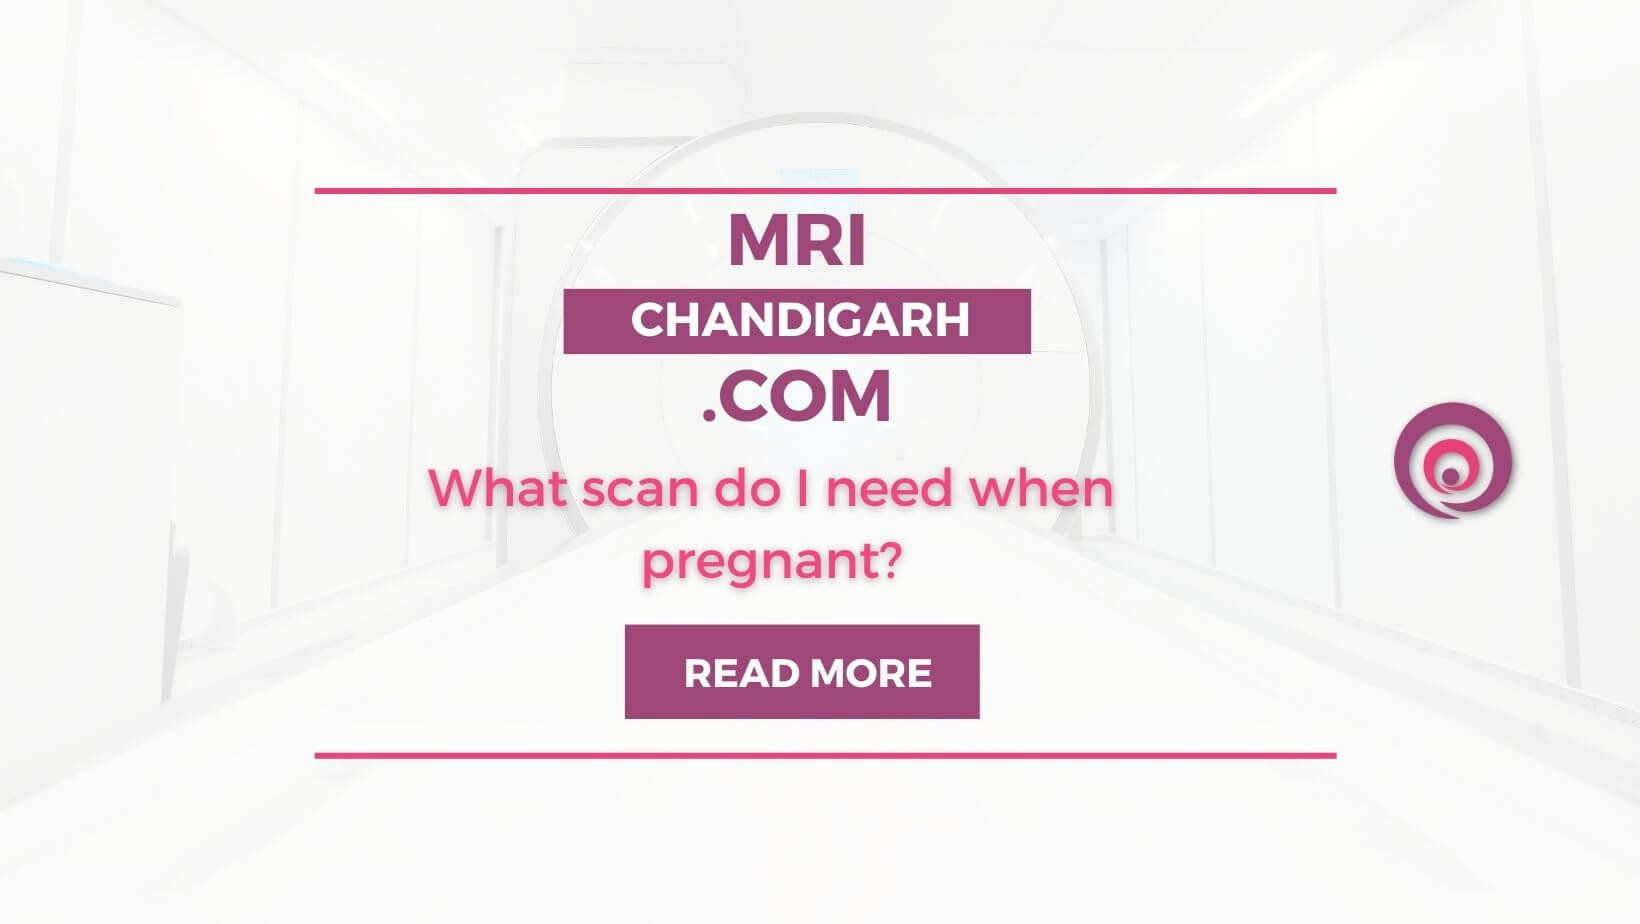 What scan do I need when pregnant?